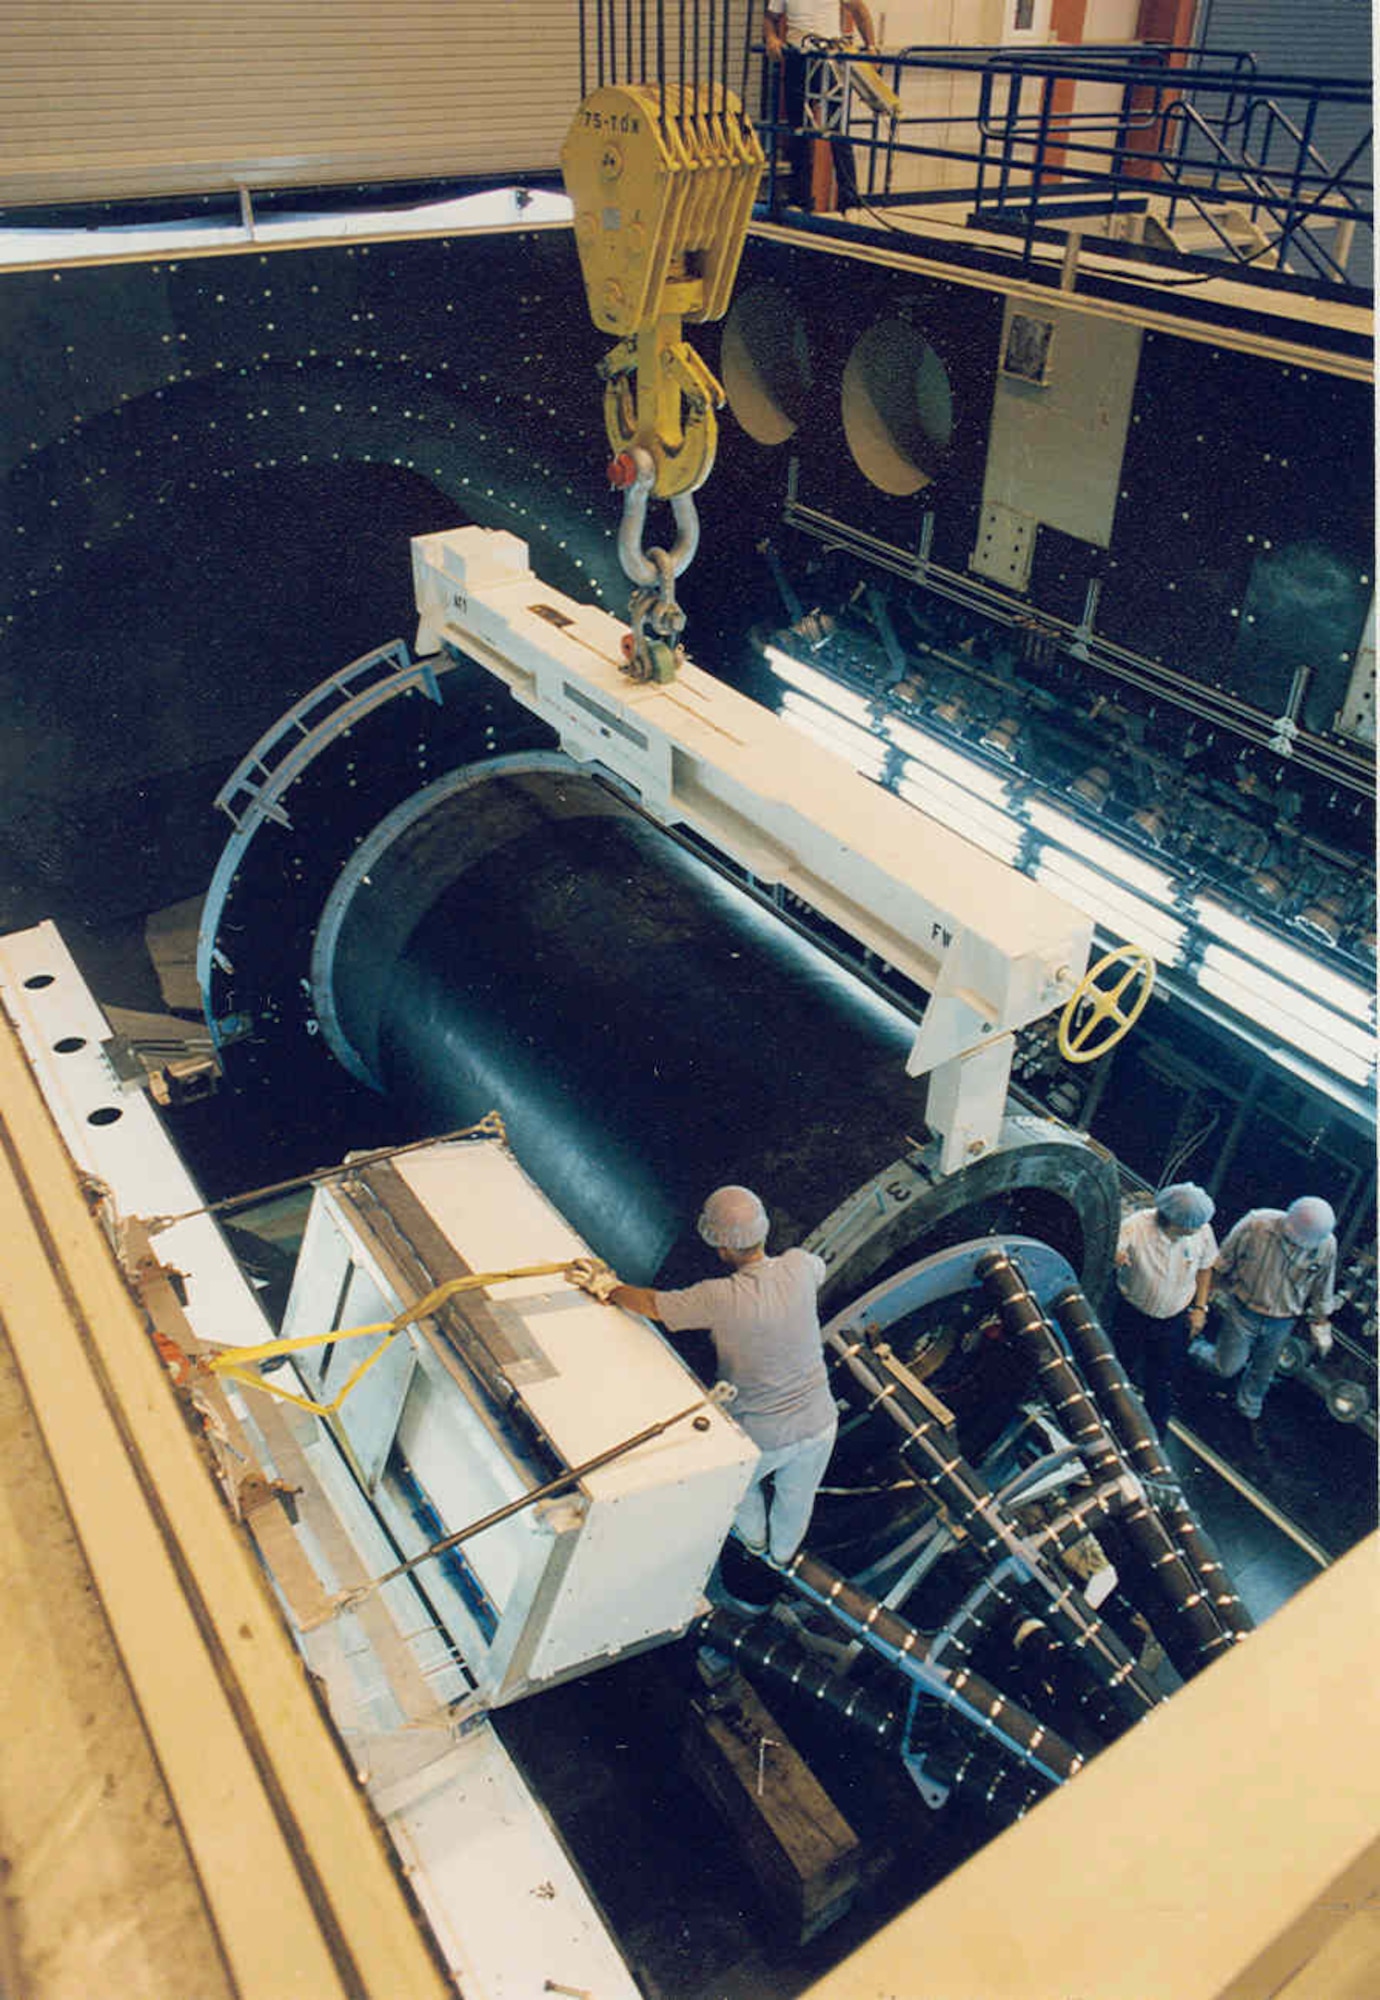 The Peacekeeper Stage II ICBM rocket motor is prepared for the first validation motor firing in the J-6 rocket test cell in 1994. (AEDC photo)